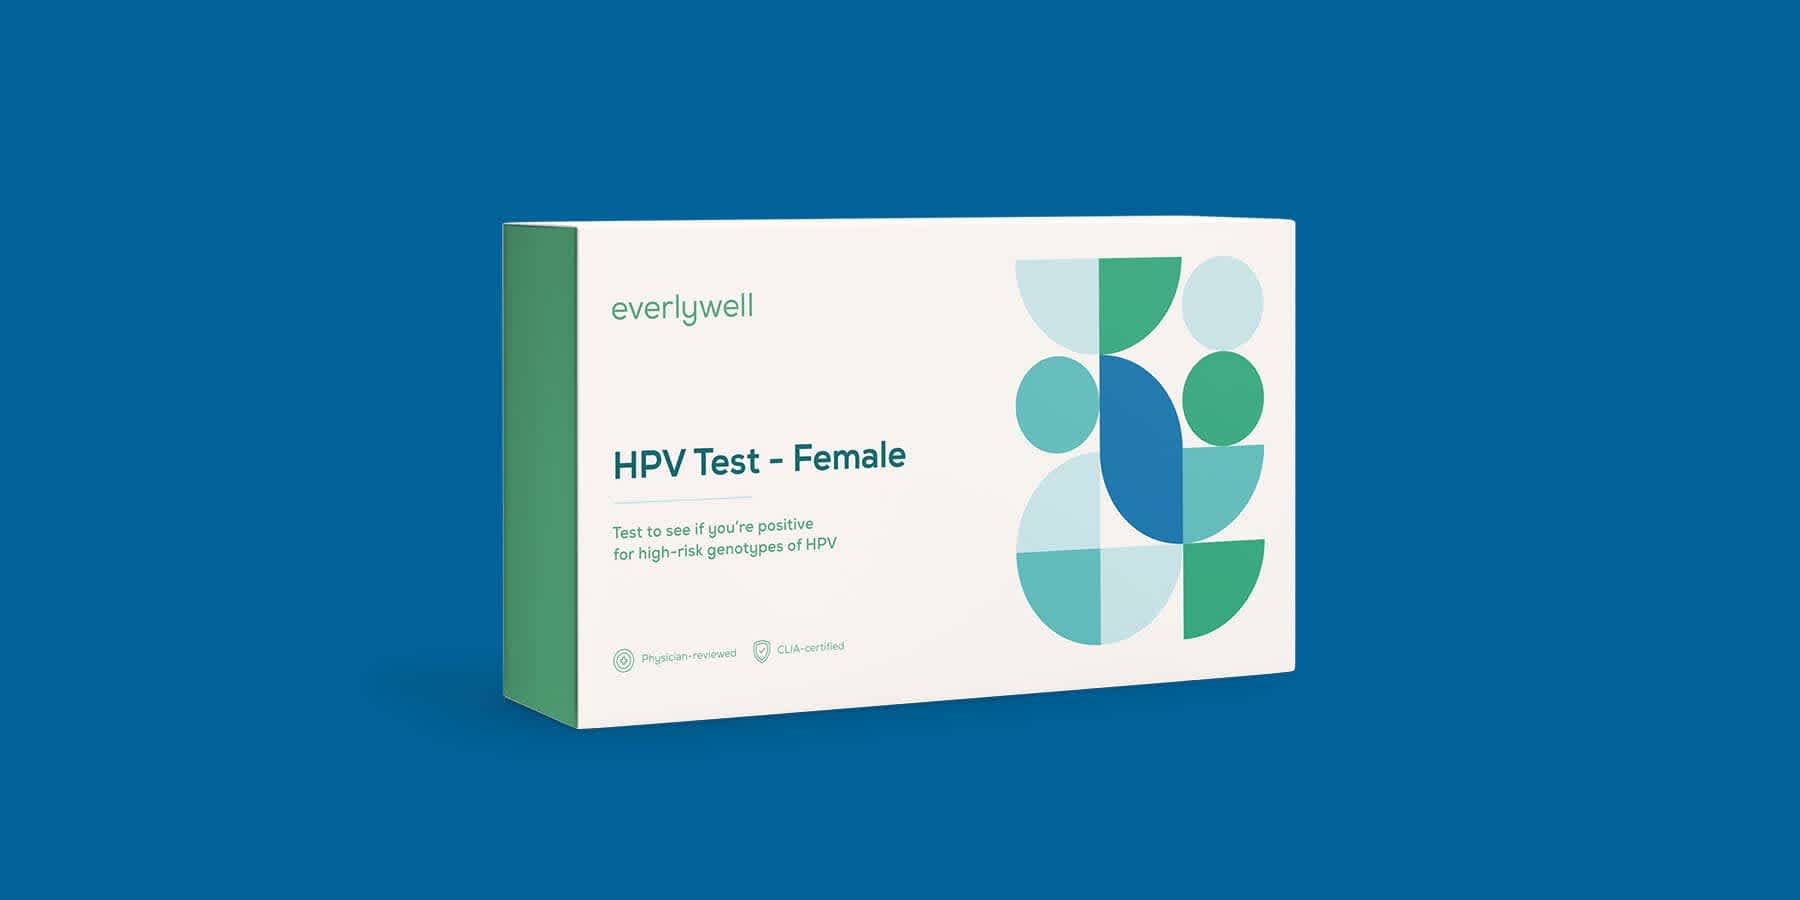 Image of Everlywell HPV Test to use if experiencing symptoms of HPV